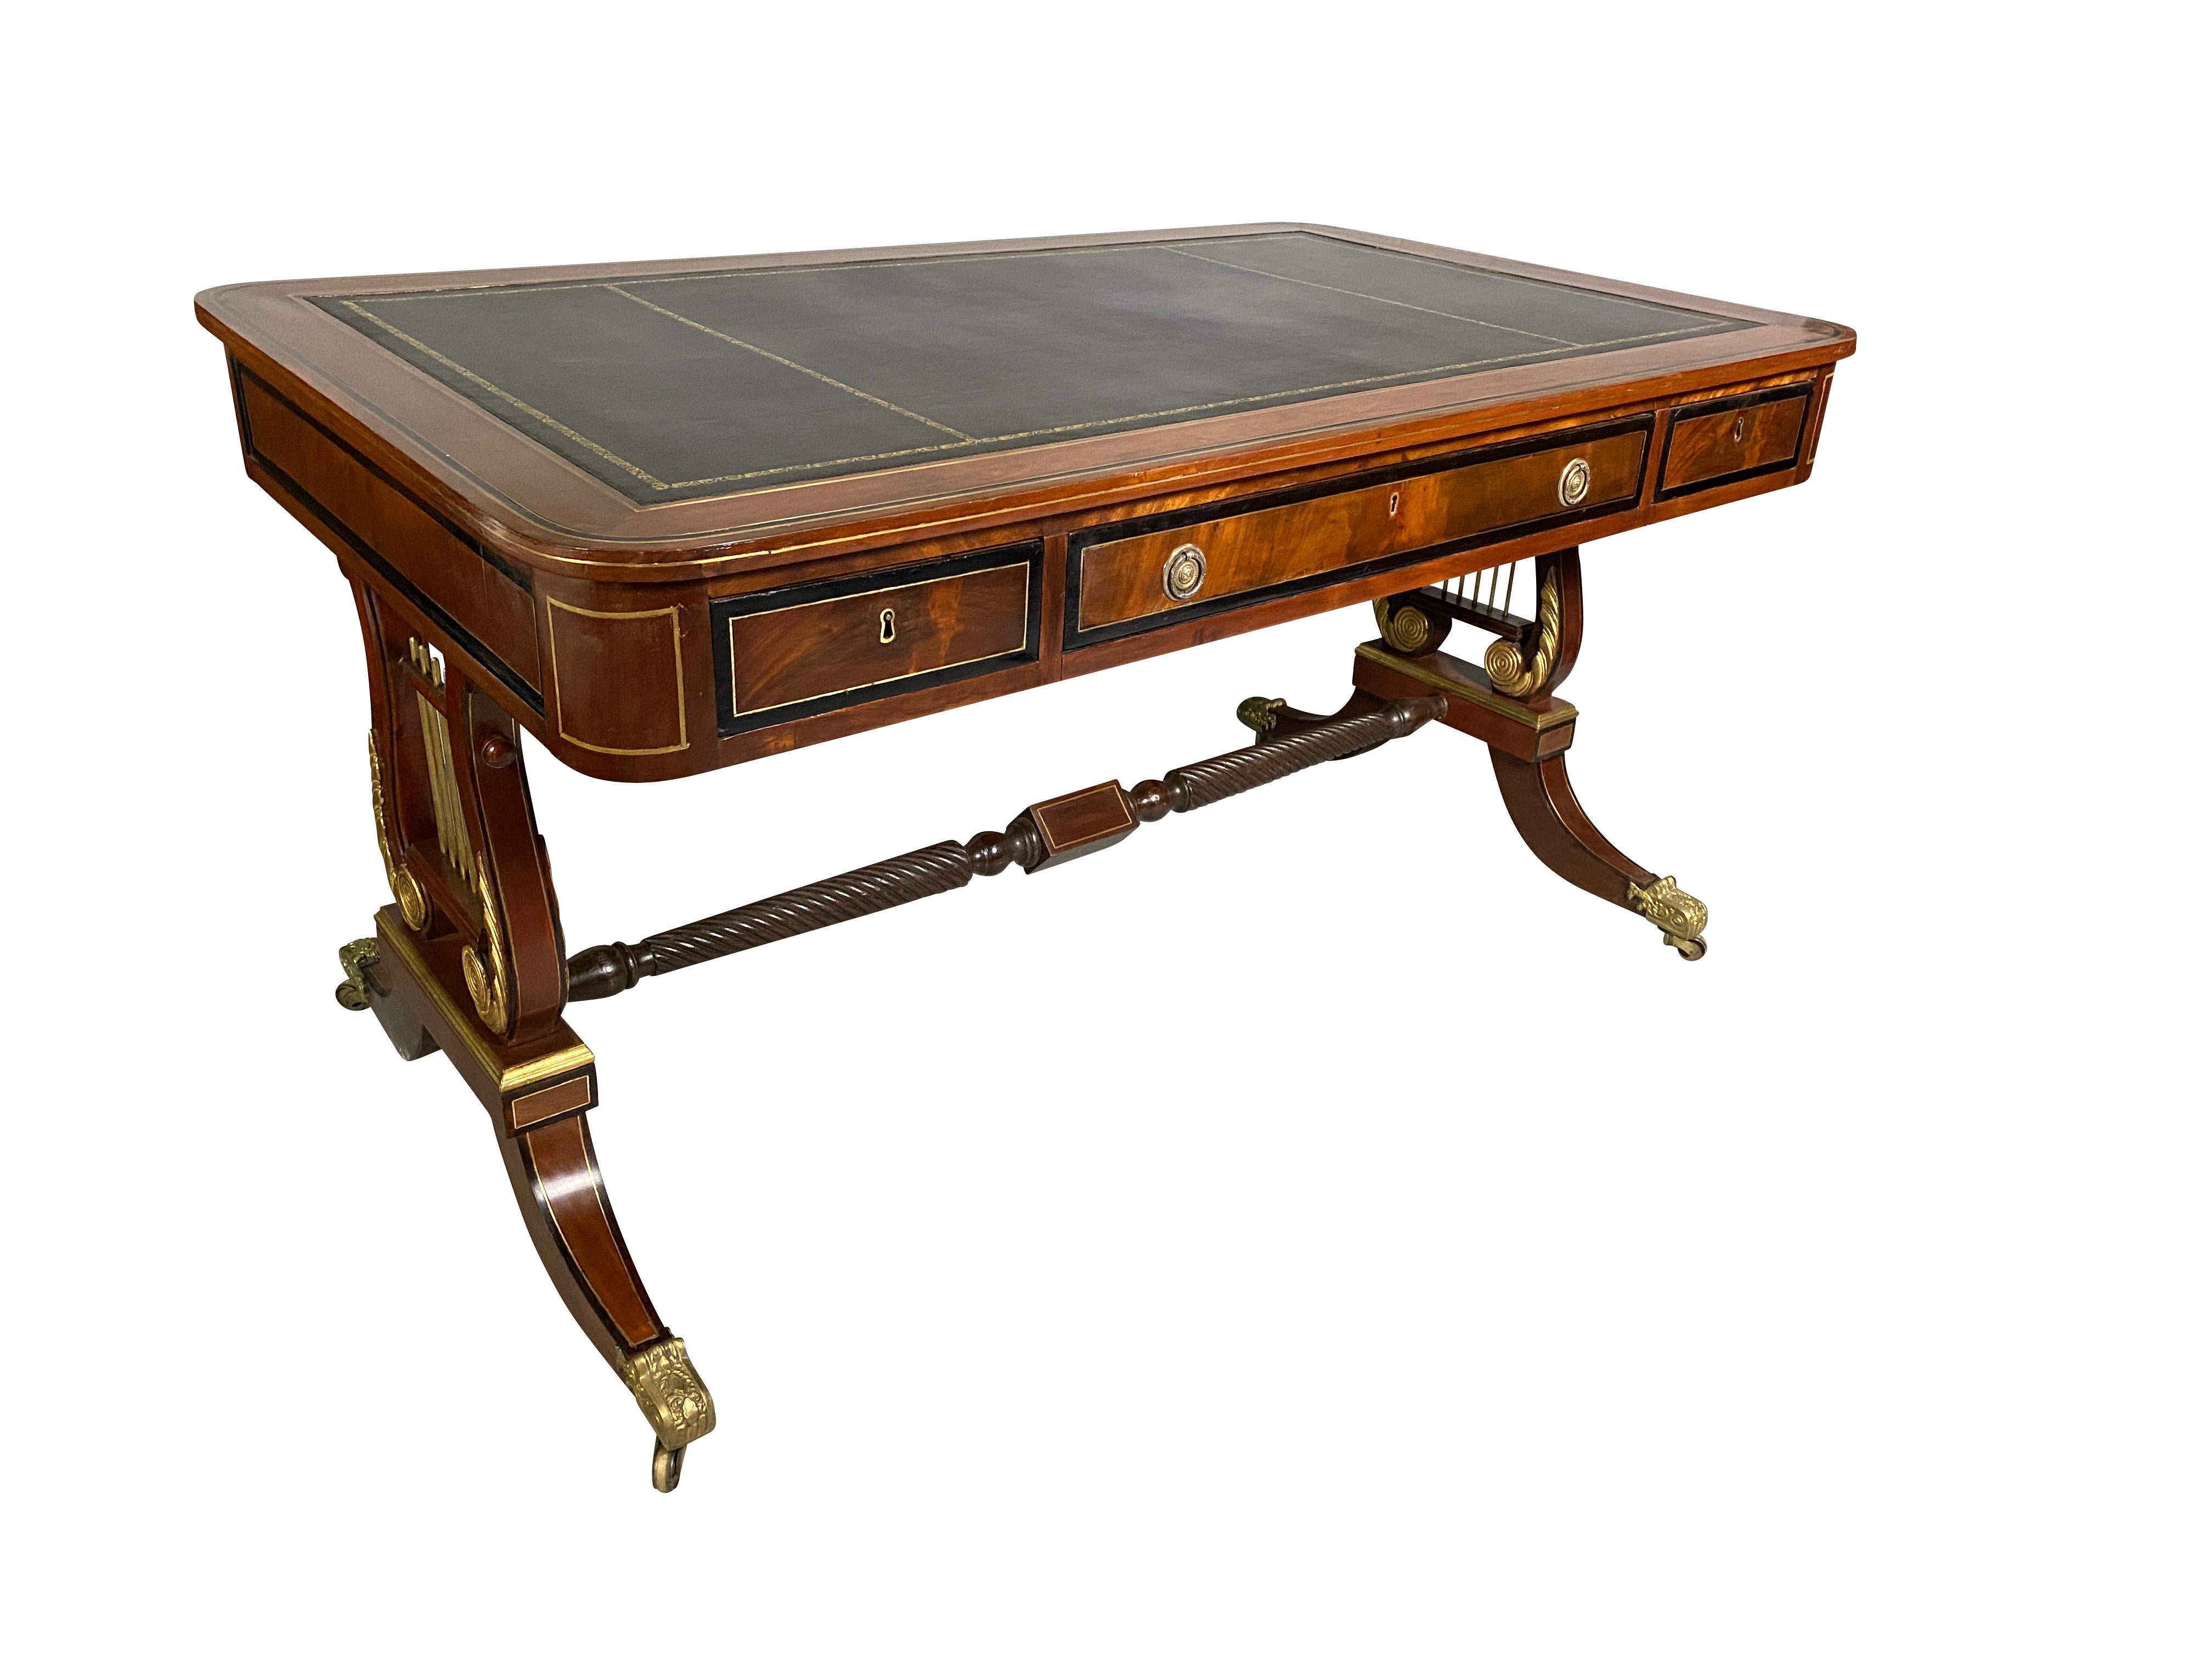 Rectangular black tooled leather top set within a border with brass and ebony inlay over a long drawer and flanked by a single drawer, the back of the desk is finished all raised on a trestle form base with partially gilded lyre form ends, joined by